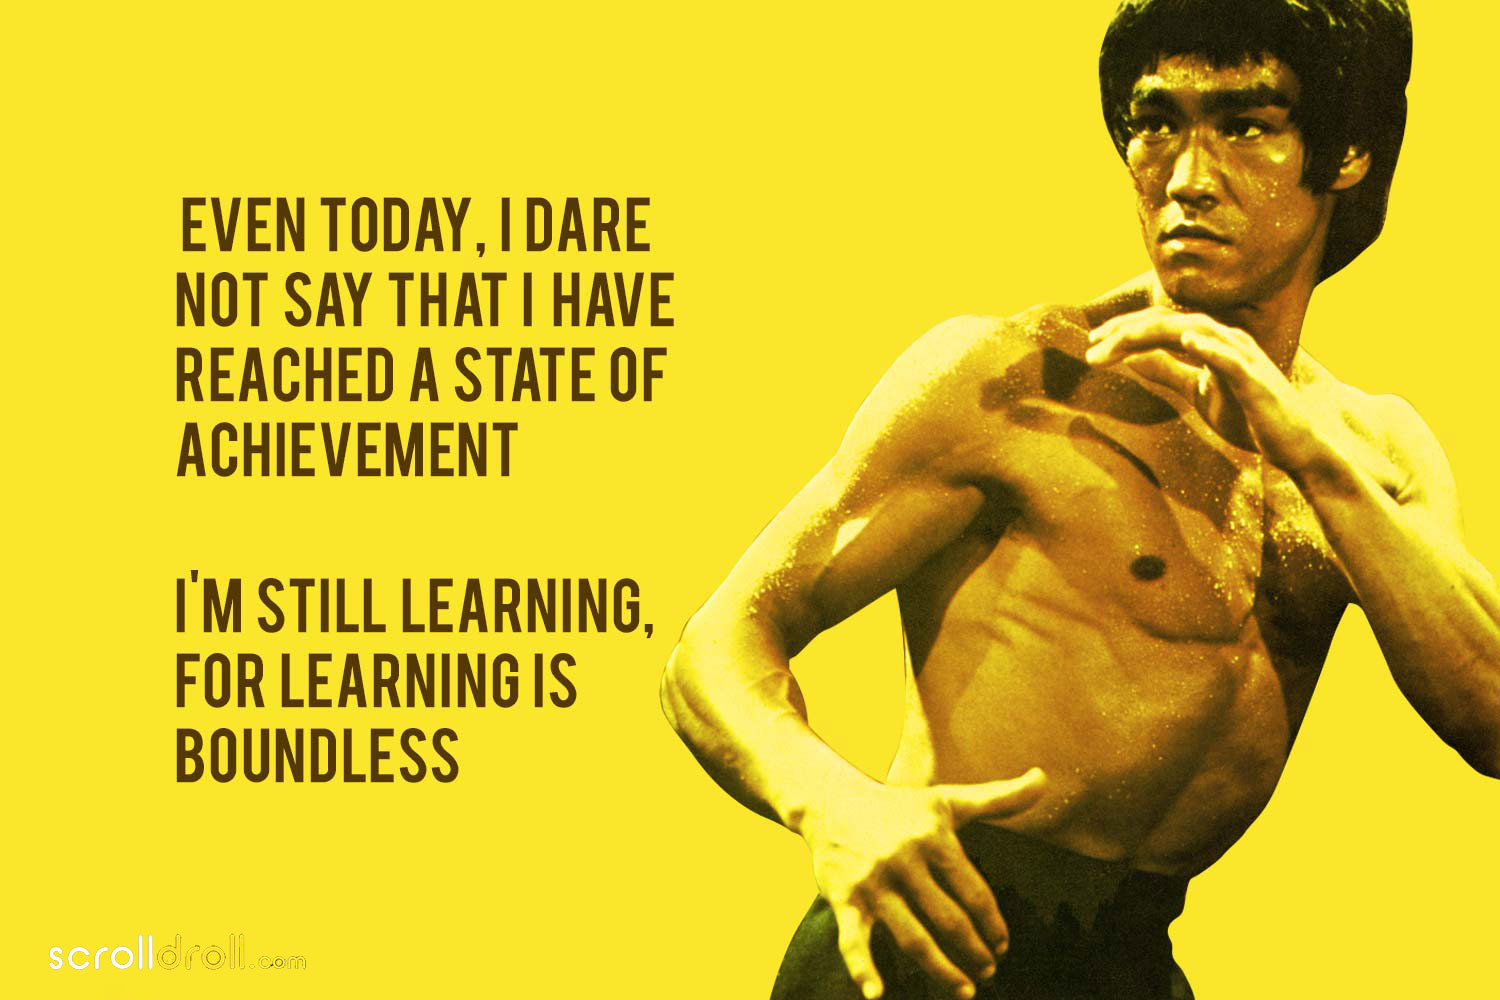 17 Bruce Lee Quotes That Will Inspire You To Achieve More